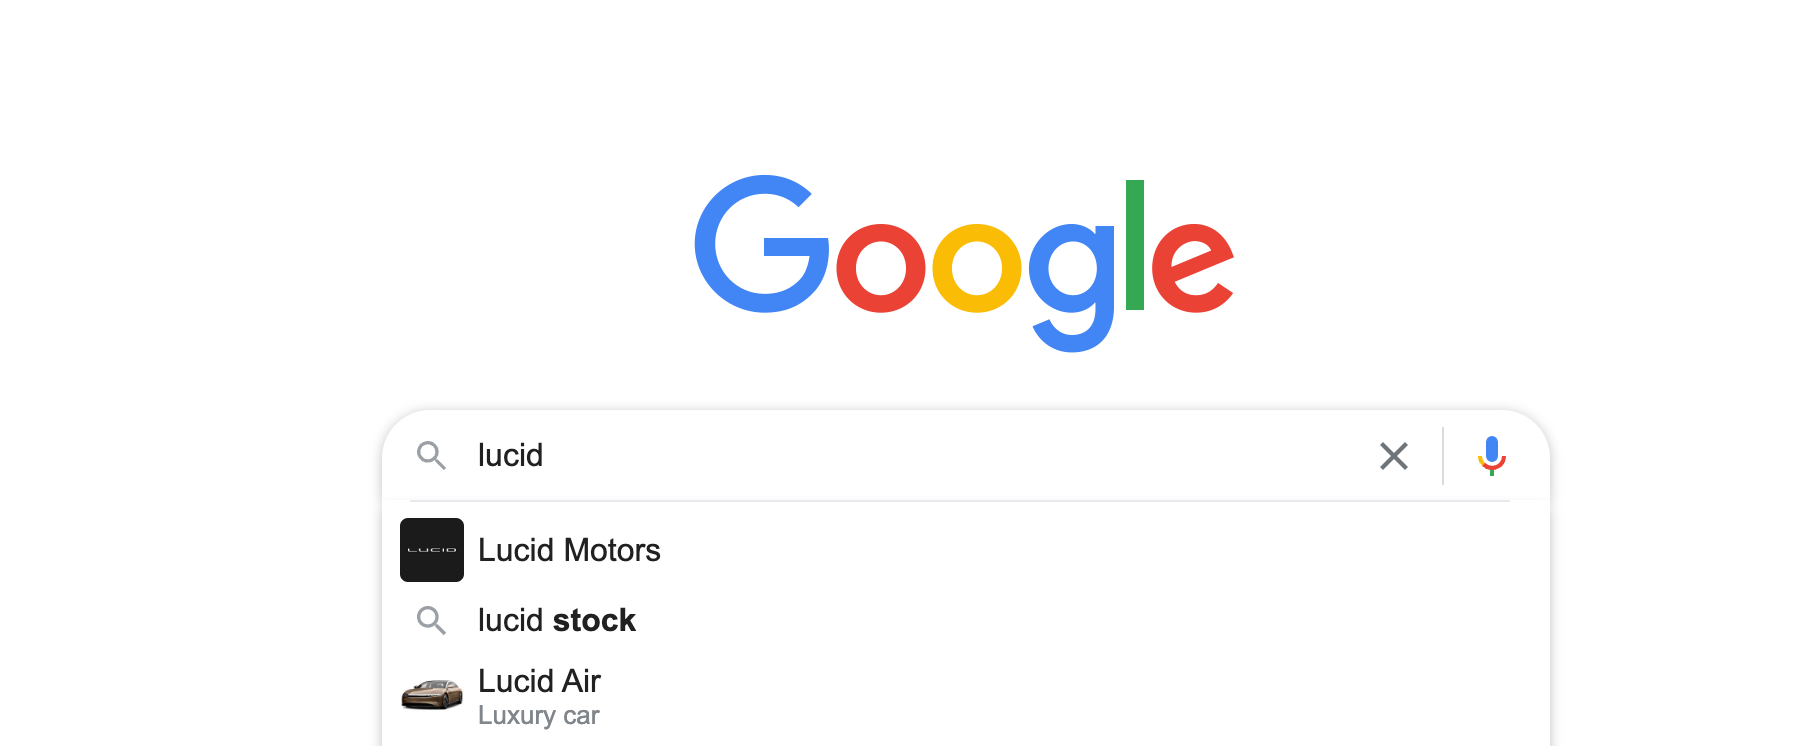 Lucid Motor’s Oscars Commercial Drove Huge Search Interest